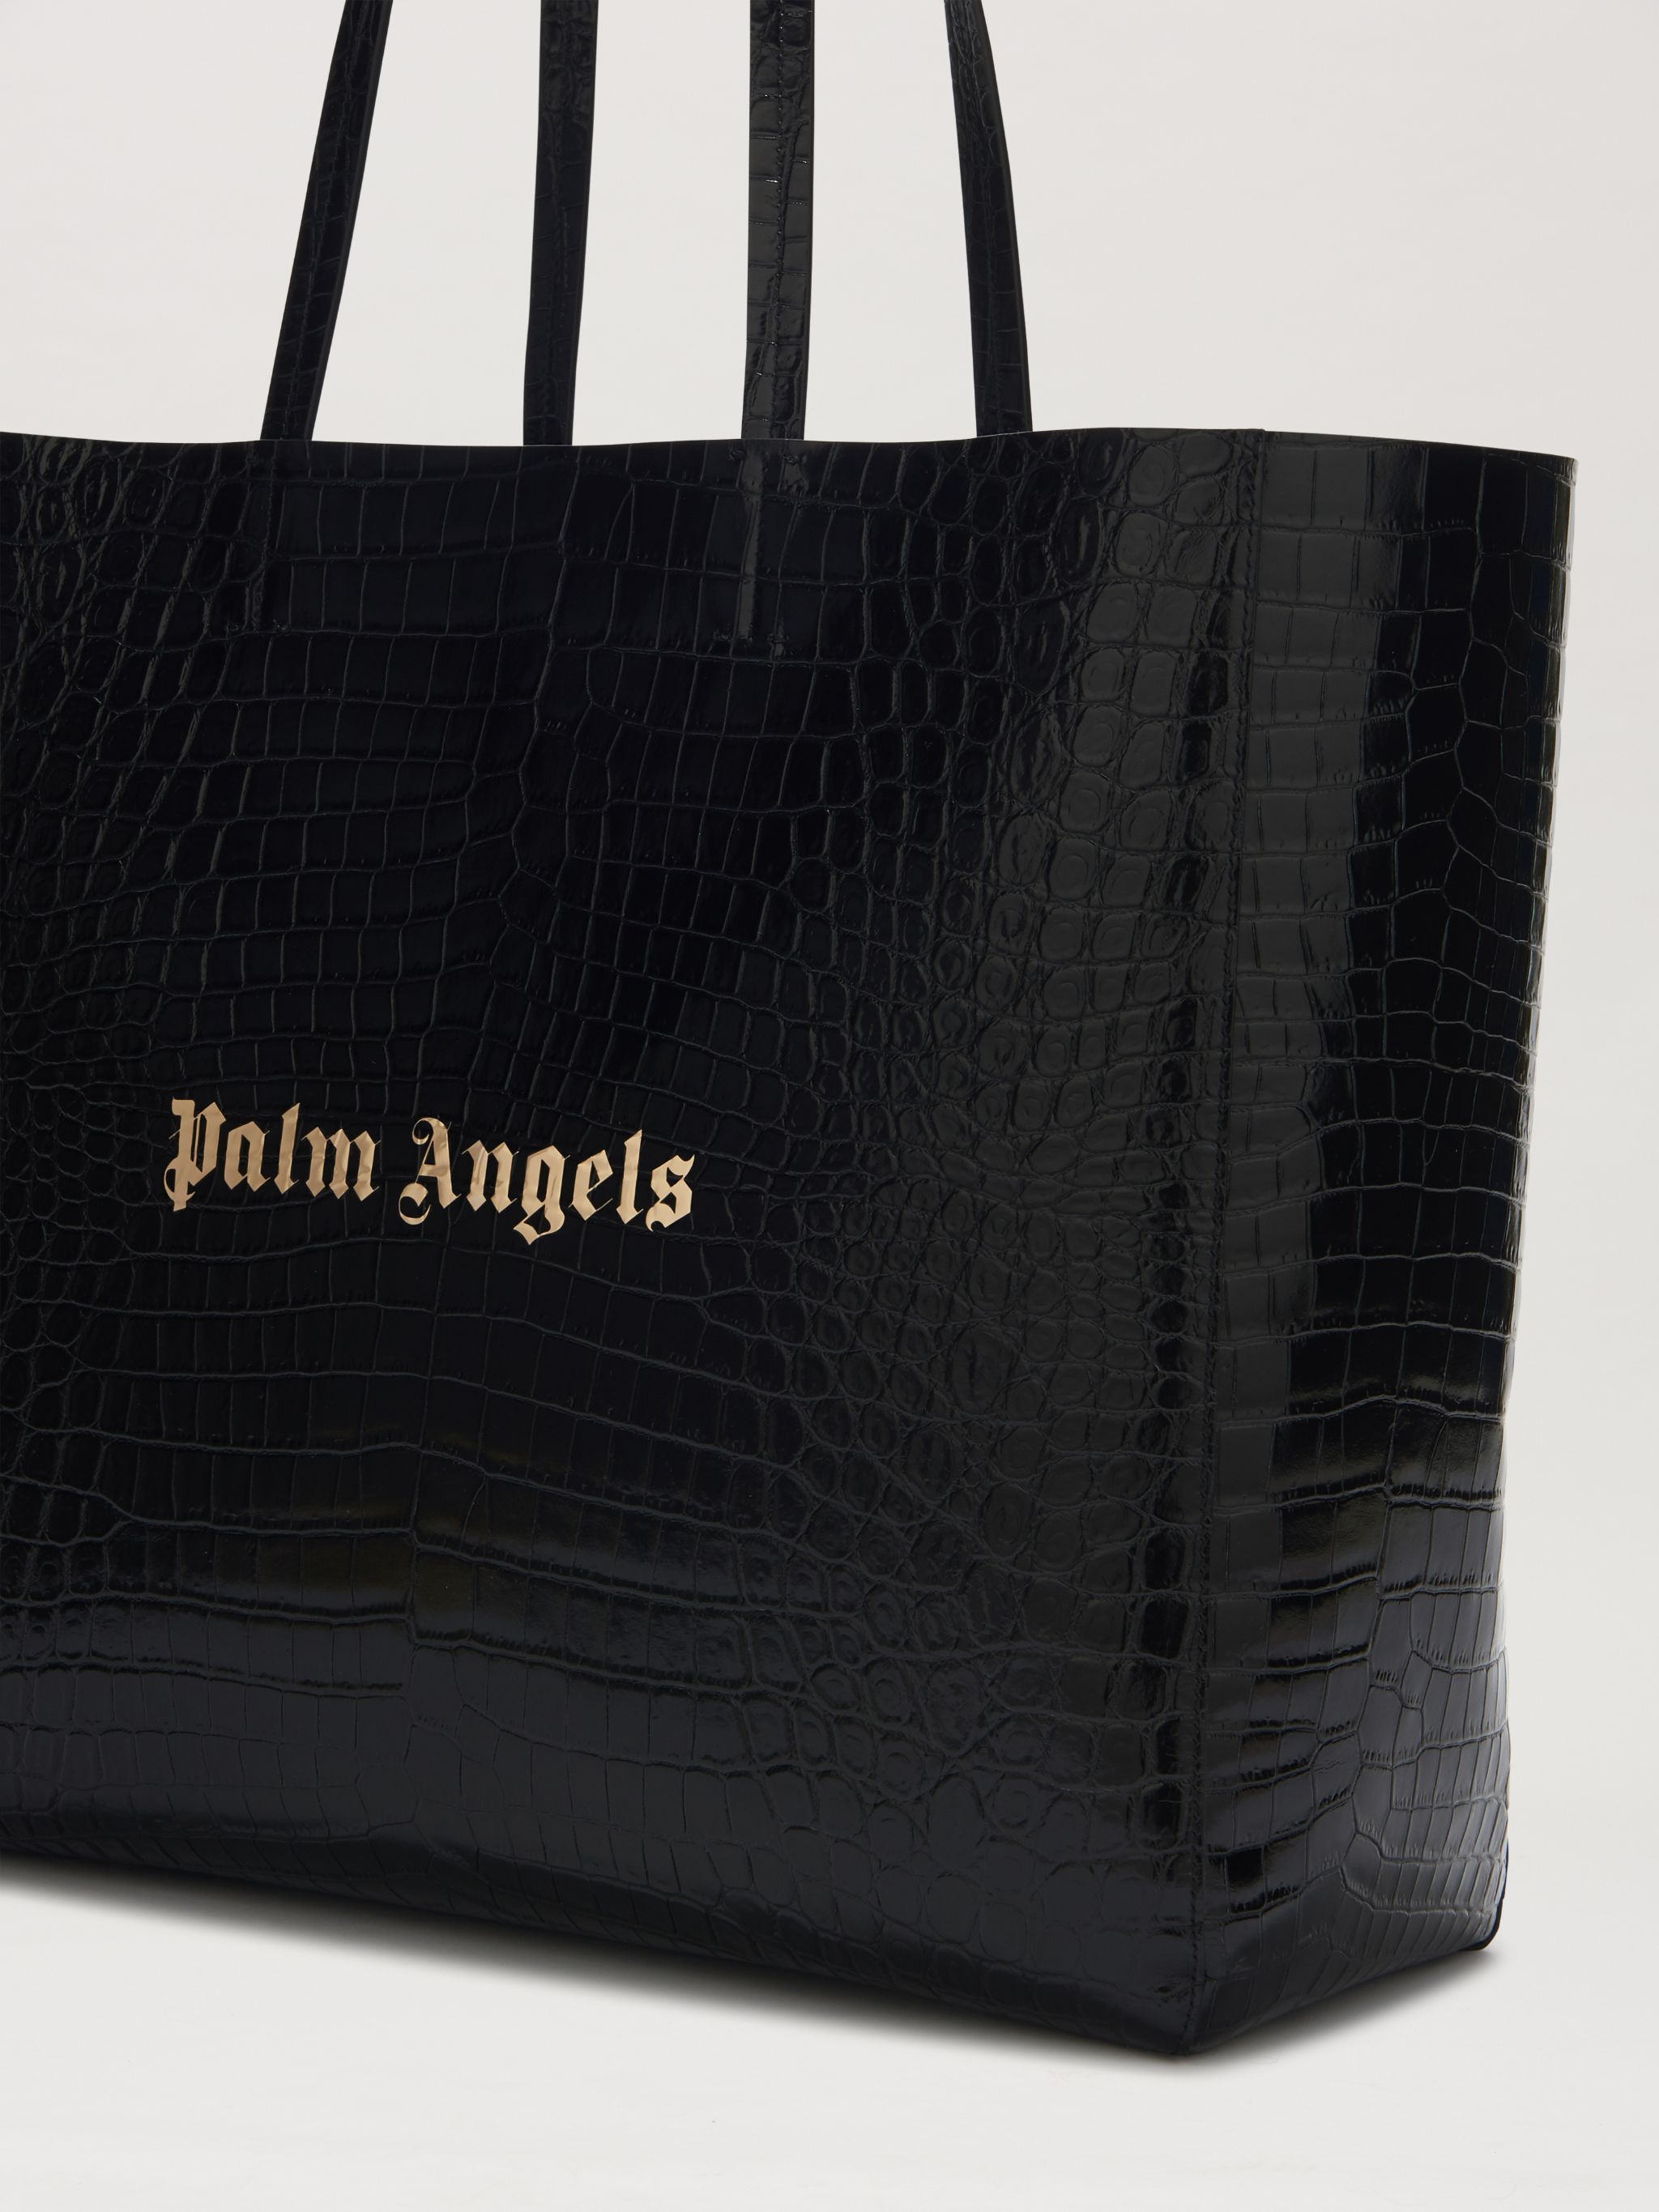 Palm Shopping Bag in black - Palm Angels® Official